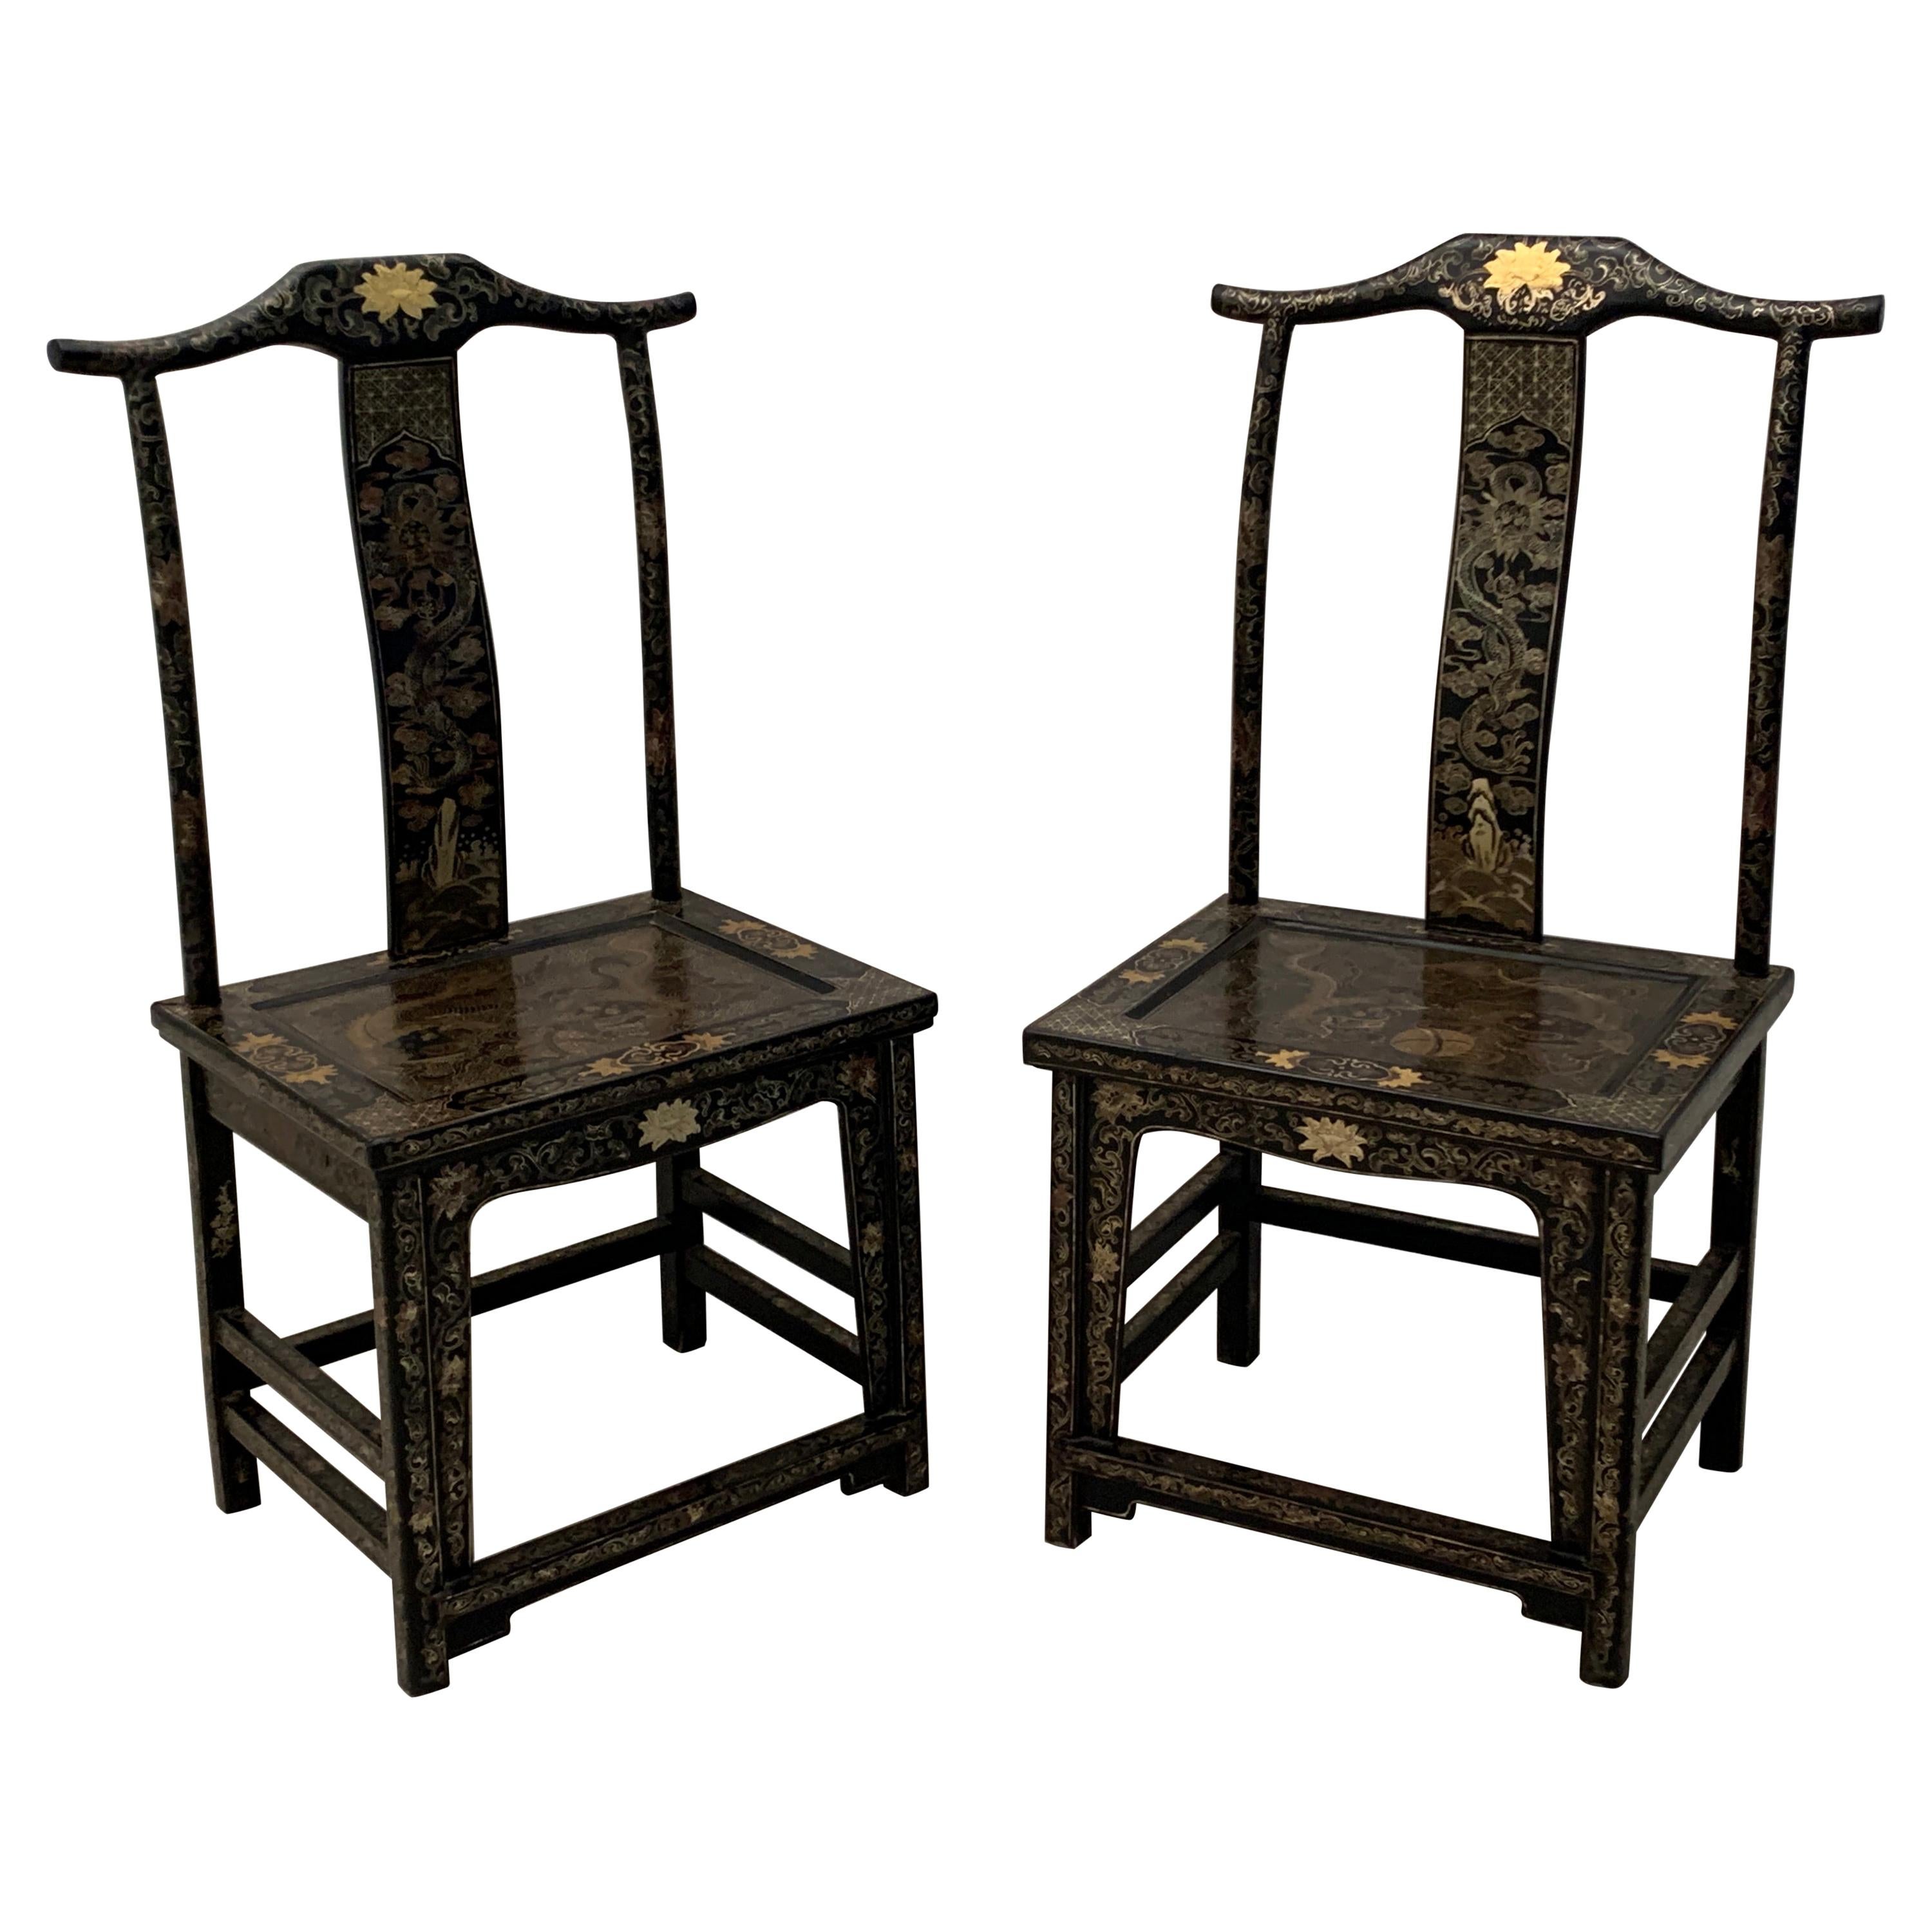 Pair Chinese Export Black Lacquer Gilt Painted Side Chairs, Mid 20th Century